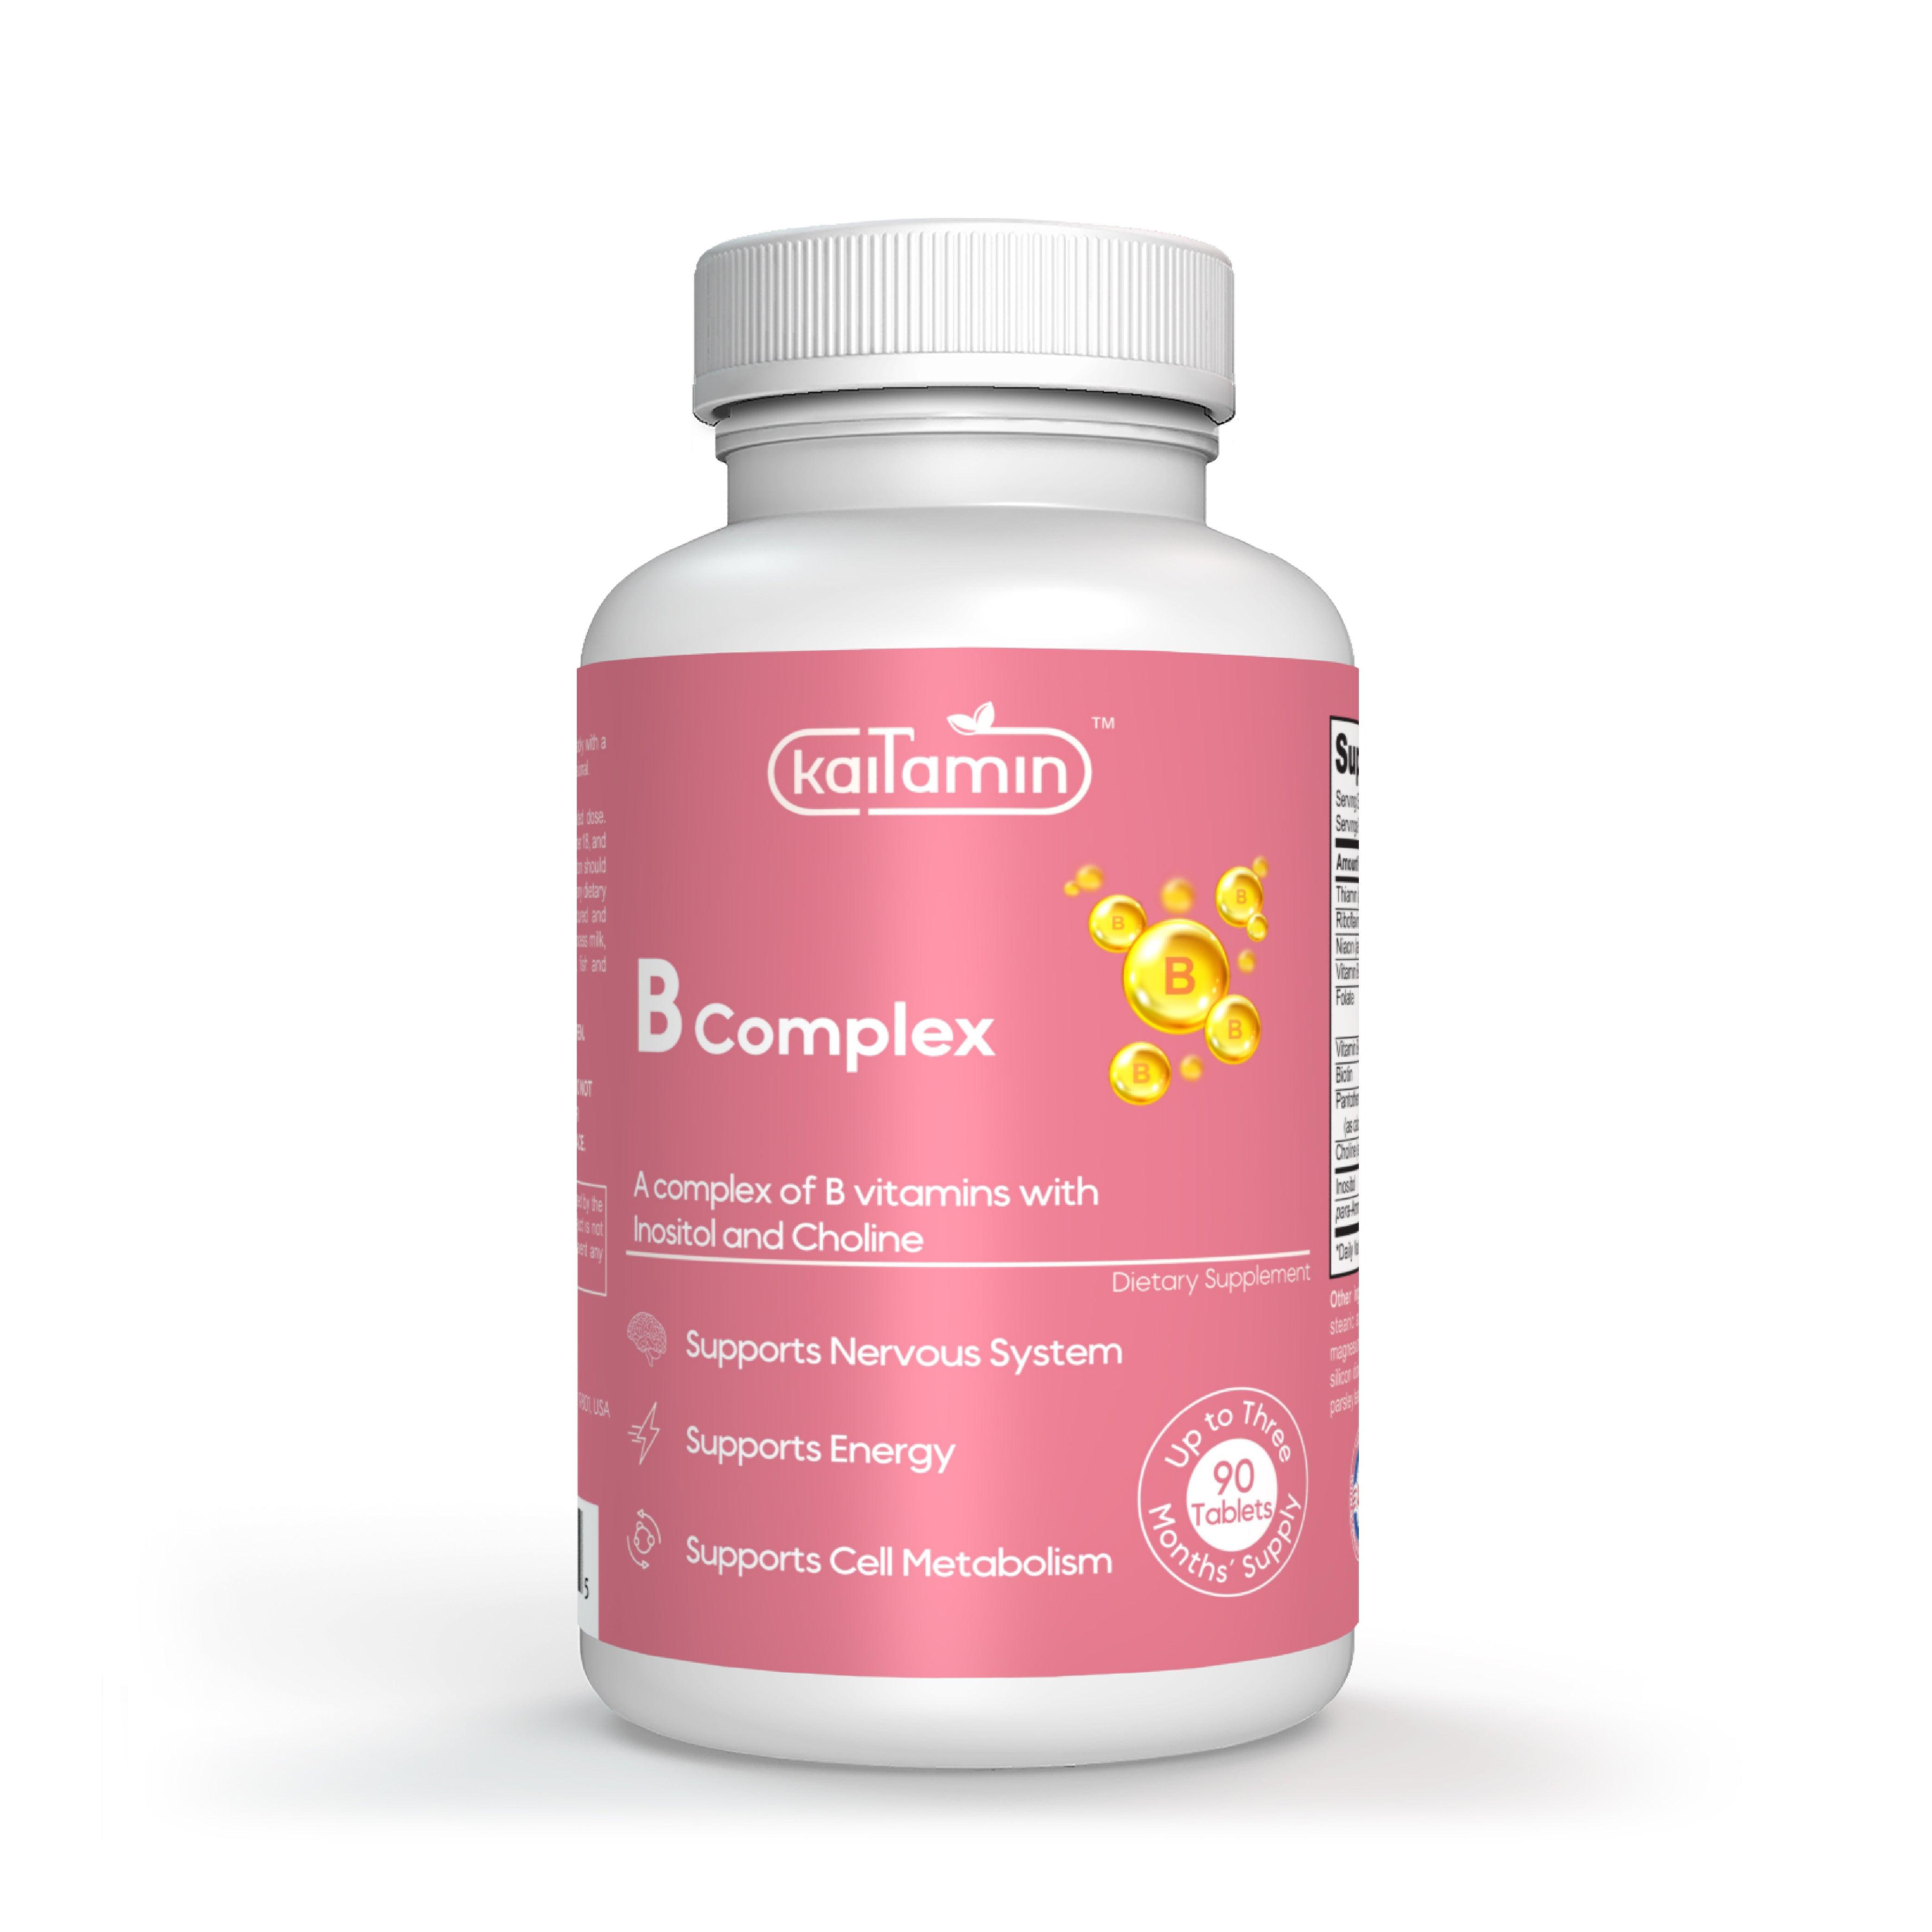 B-Complex Vitamins - Support Energy, Memory, Hormone - 90 Tablets - Kaitamin